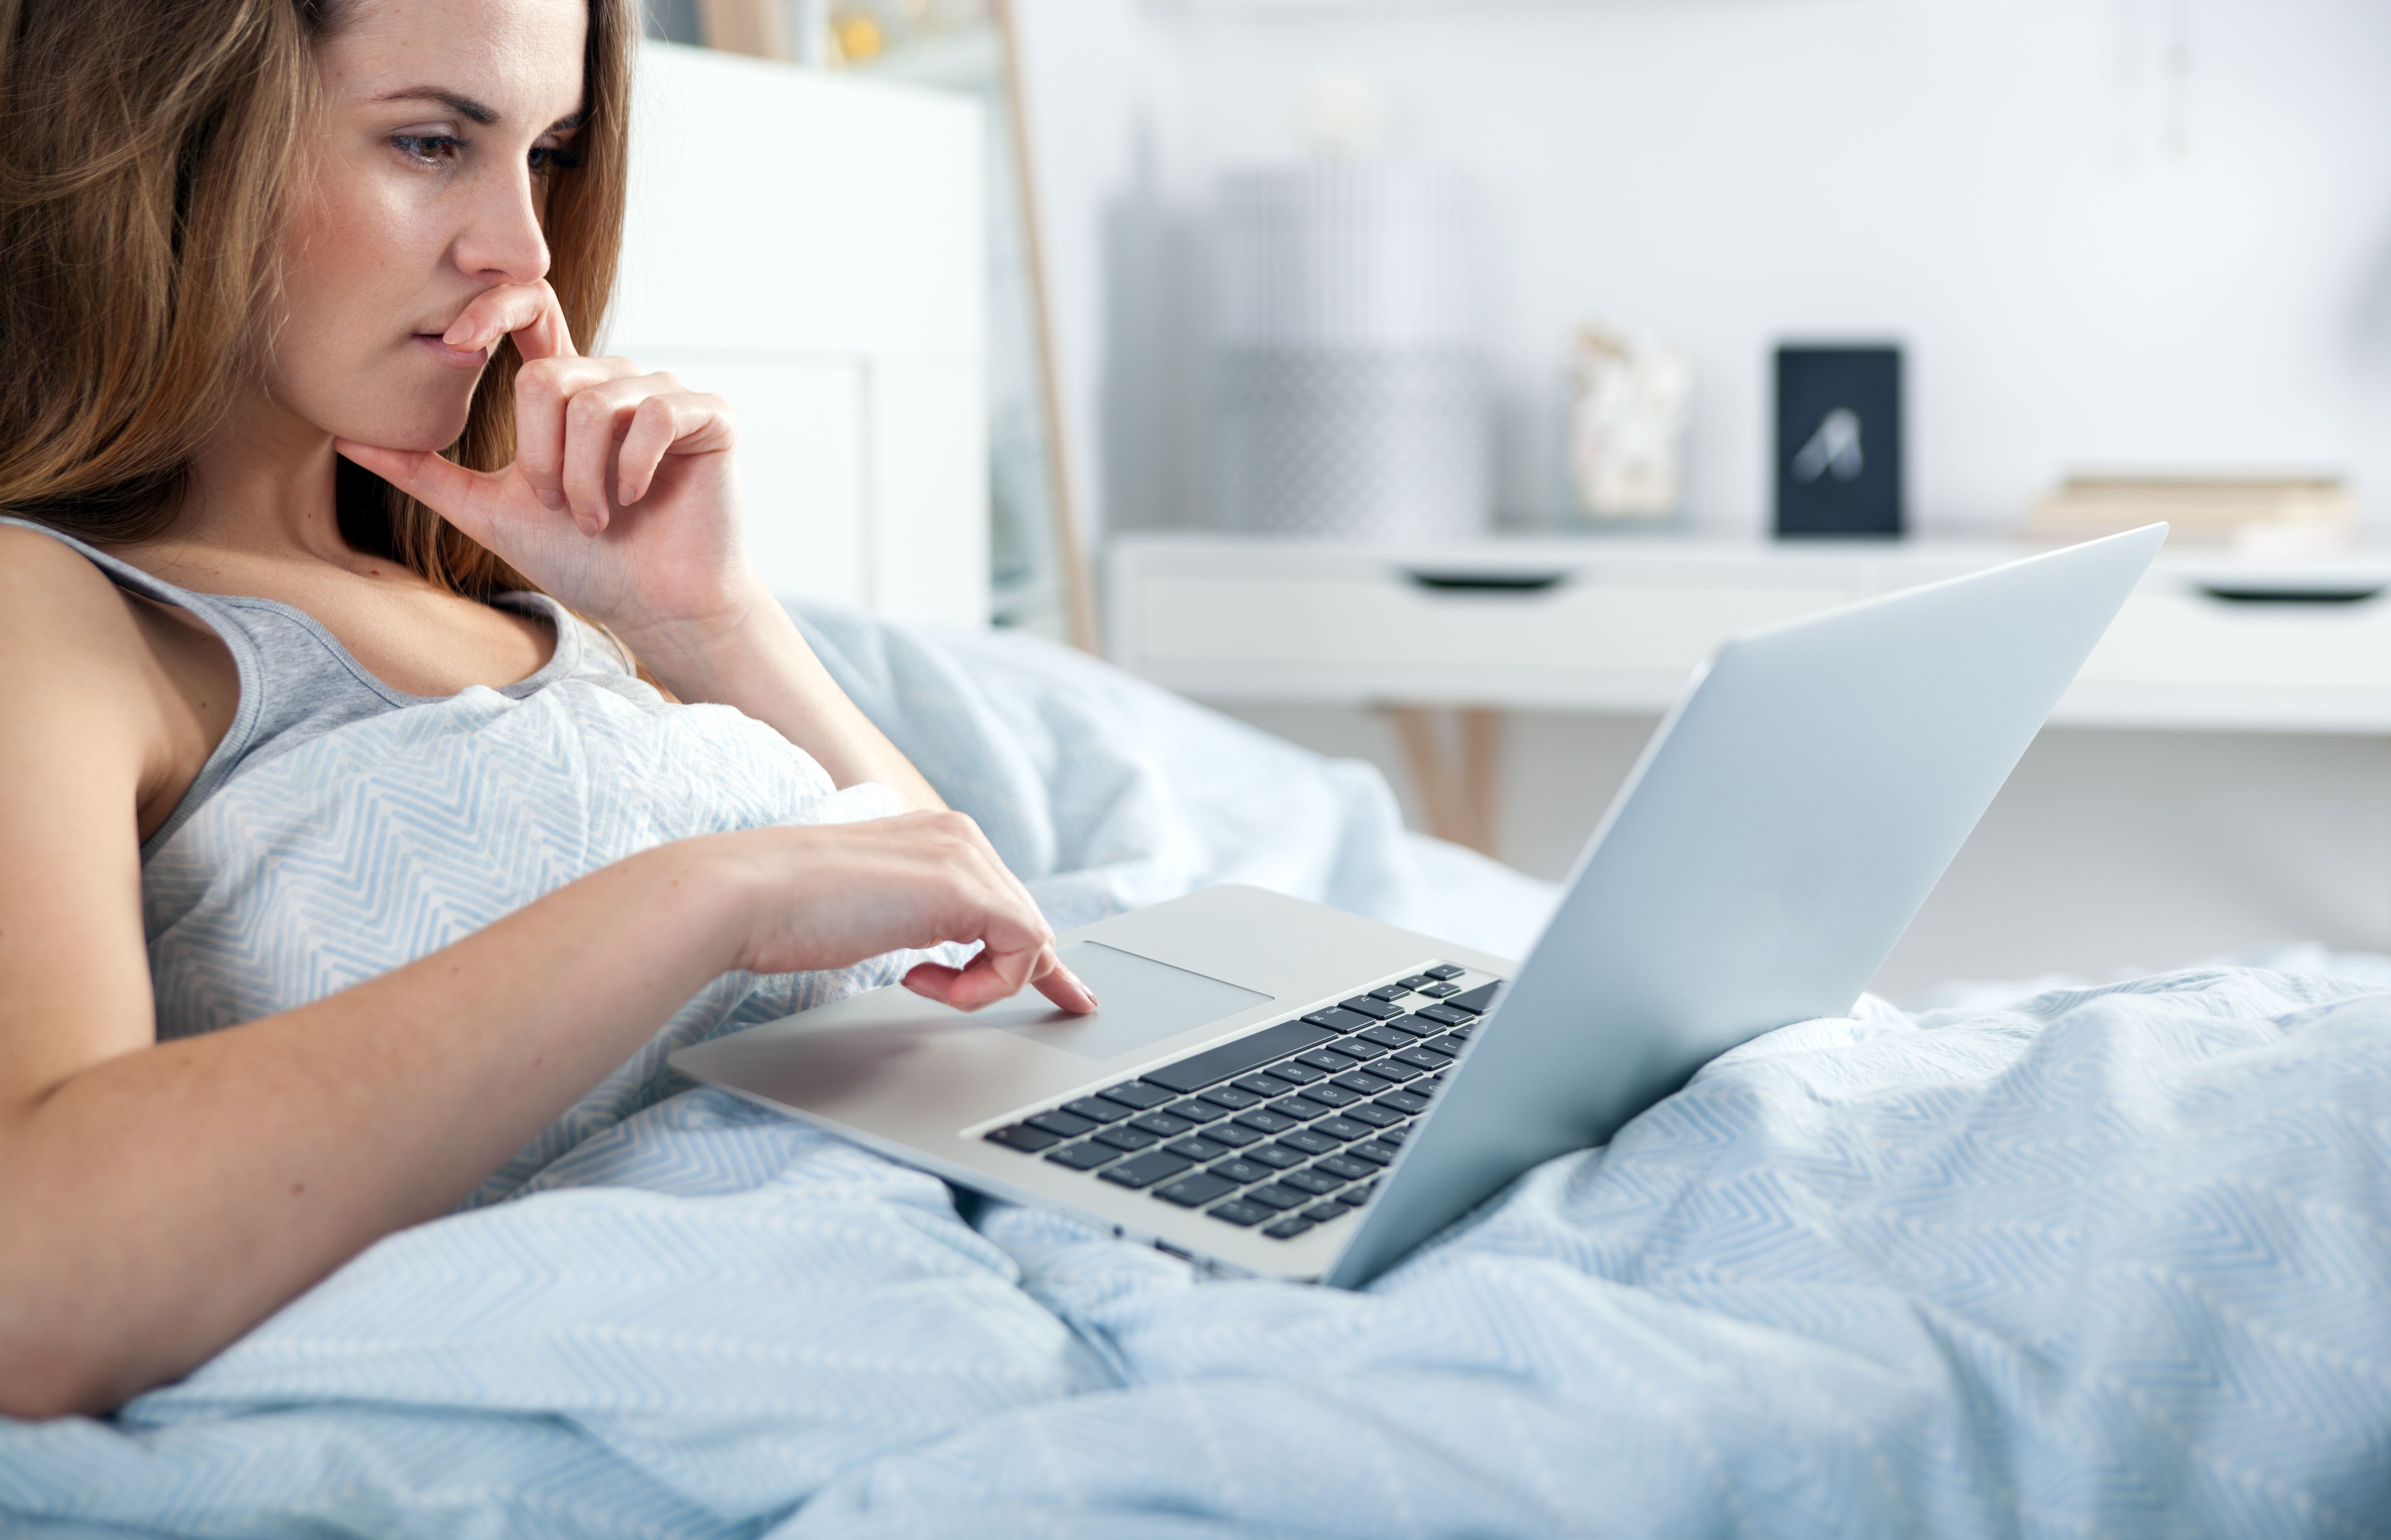 A woman looking at a laptop in a bed